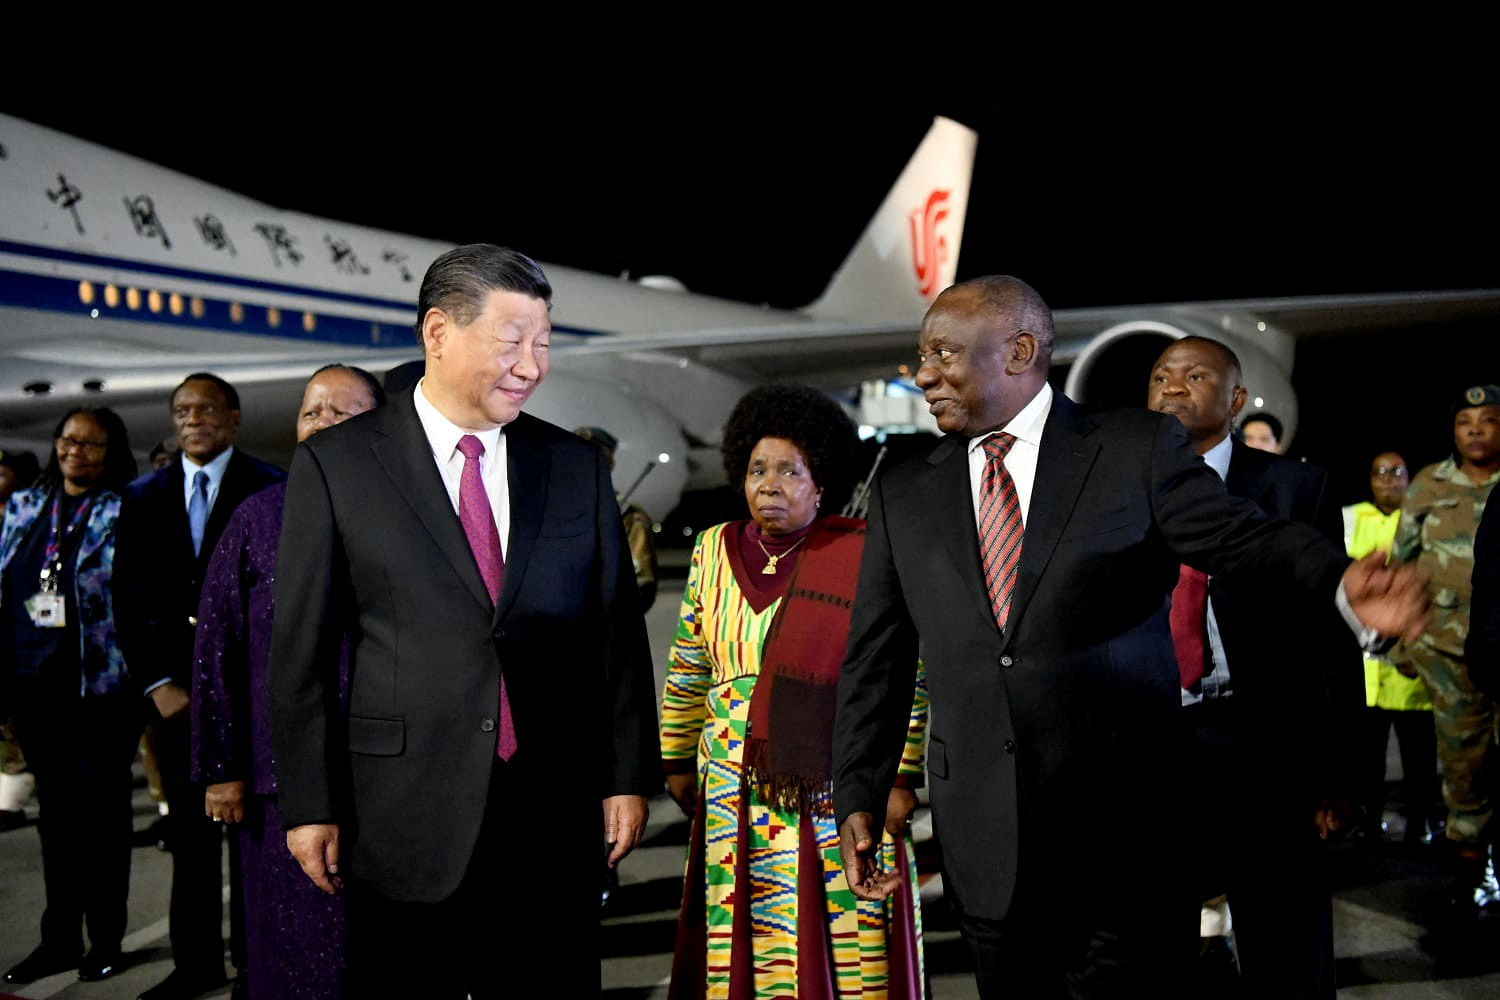 Chinese President Xi Jinping lands in South Africa for BRICS Summit